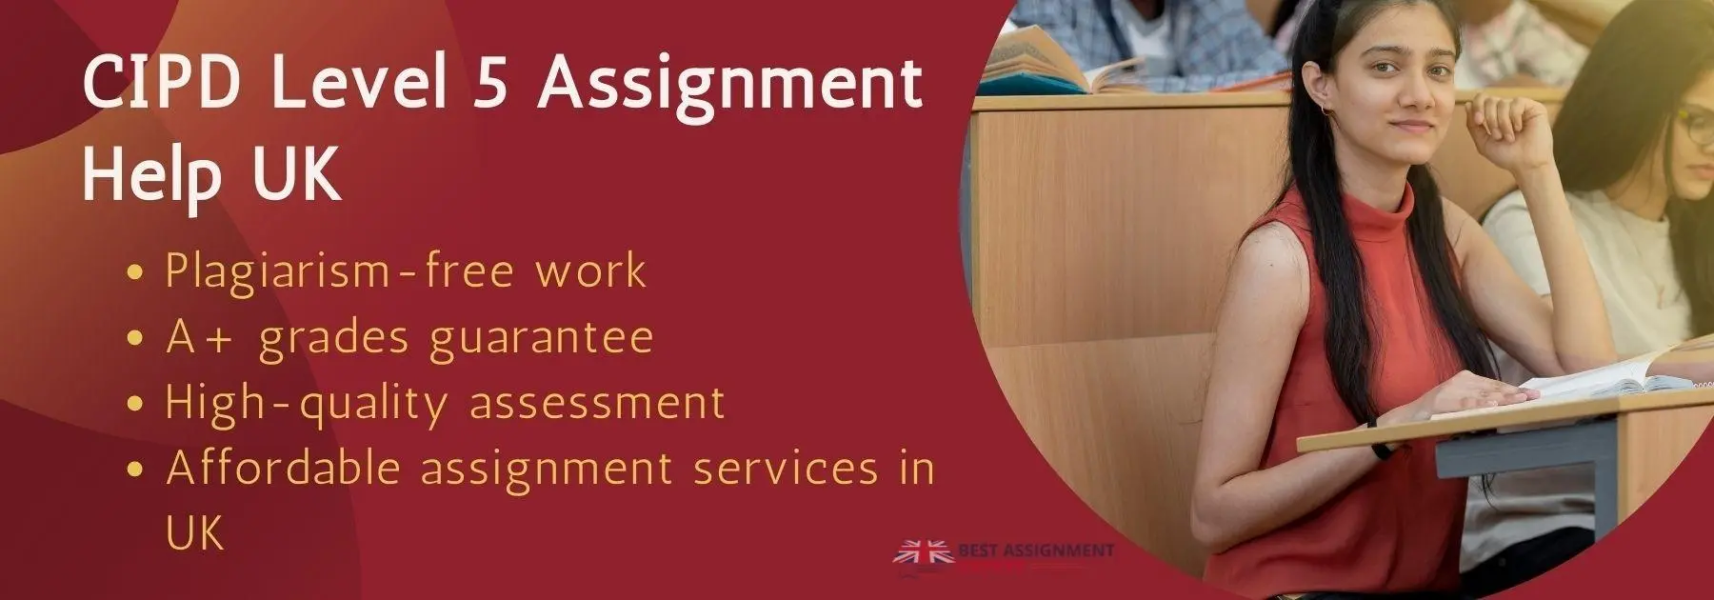 cipd assignment help india